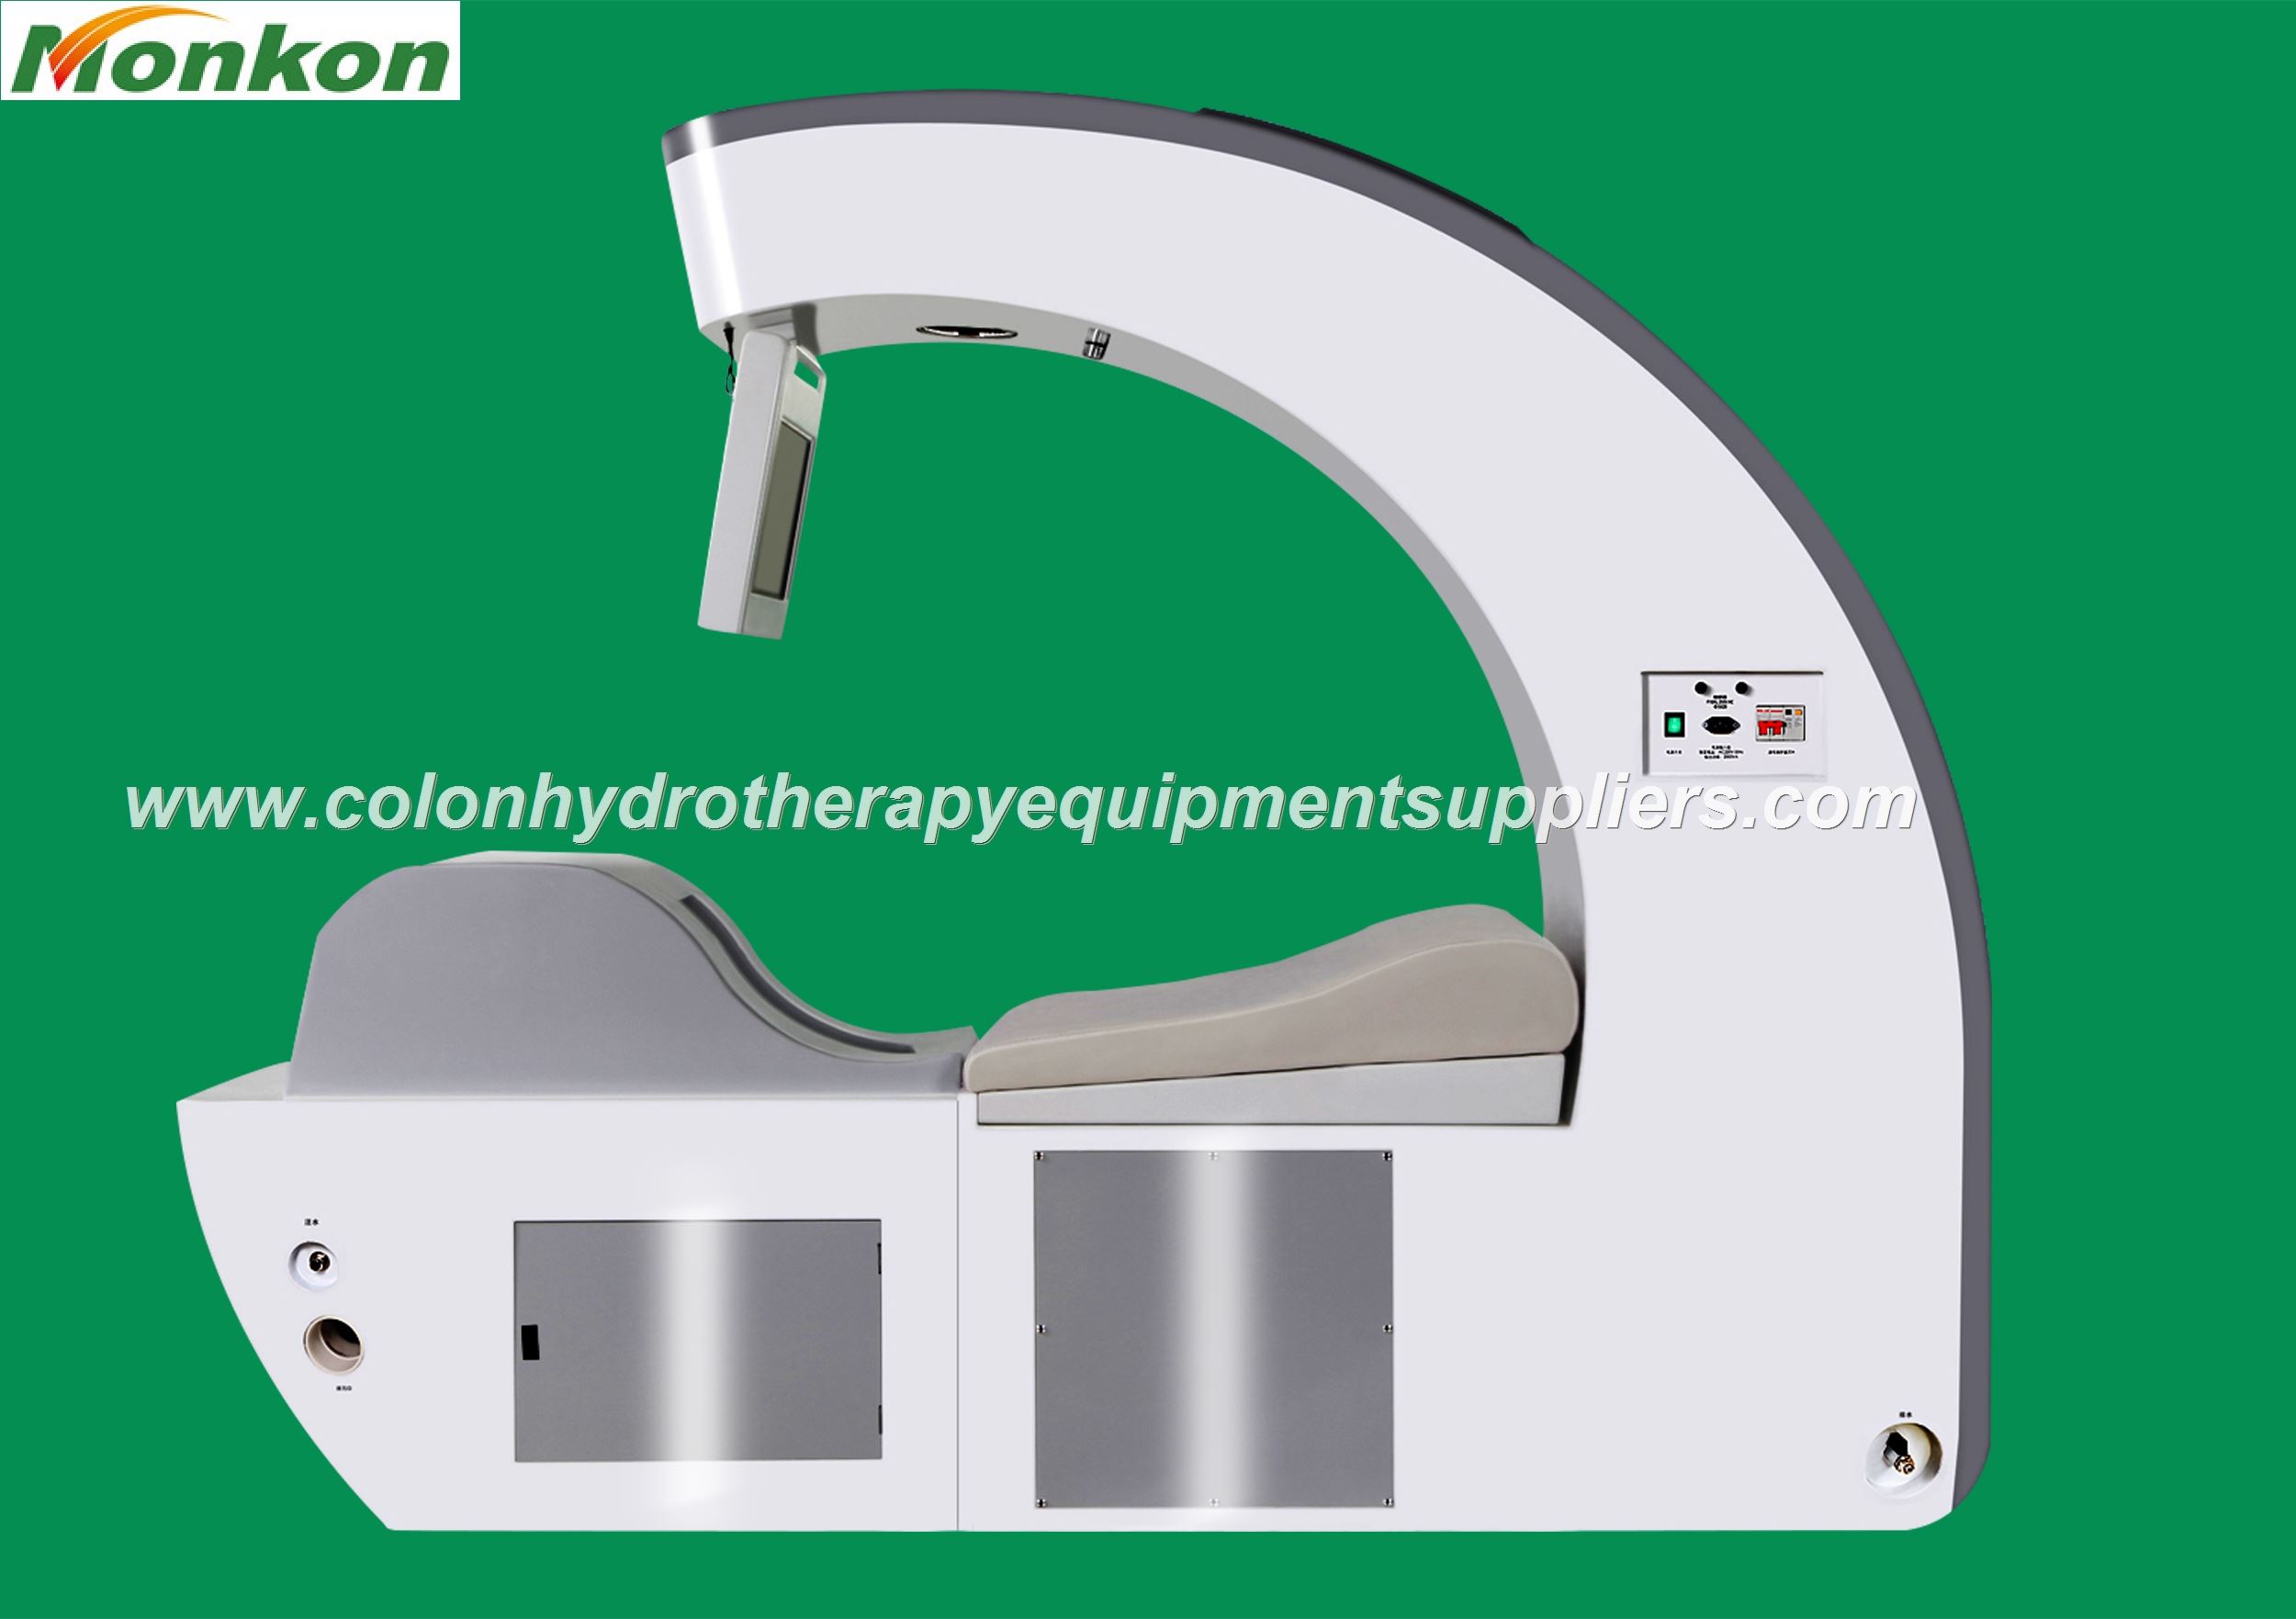 LIBBE Colon Hydrotherapy Equipment for Sale